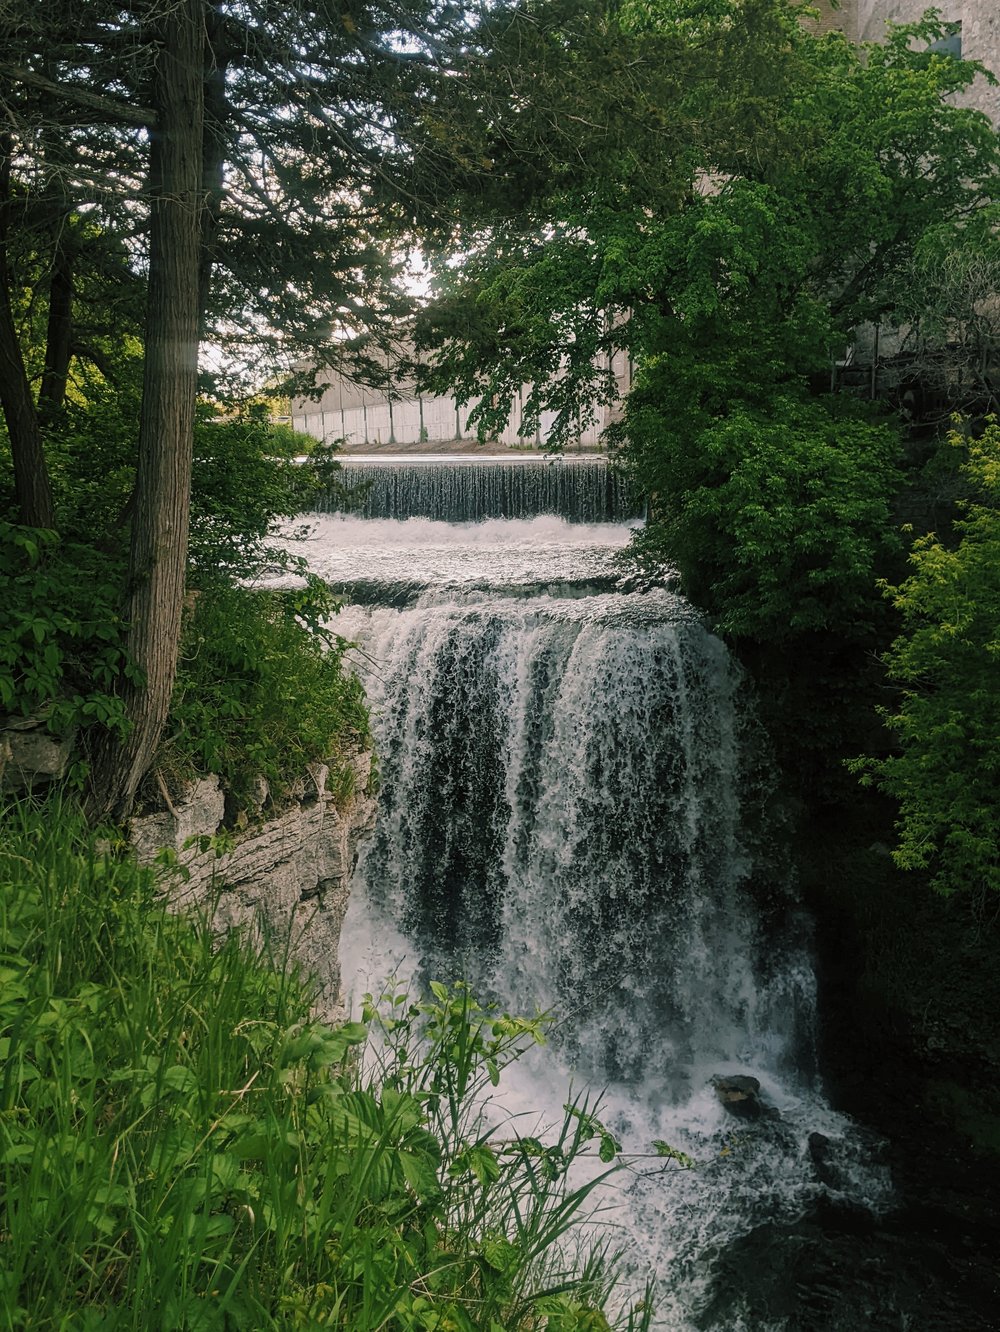 Out of the city, the Vermillion Falls